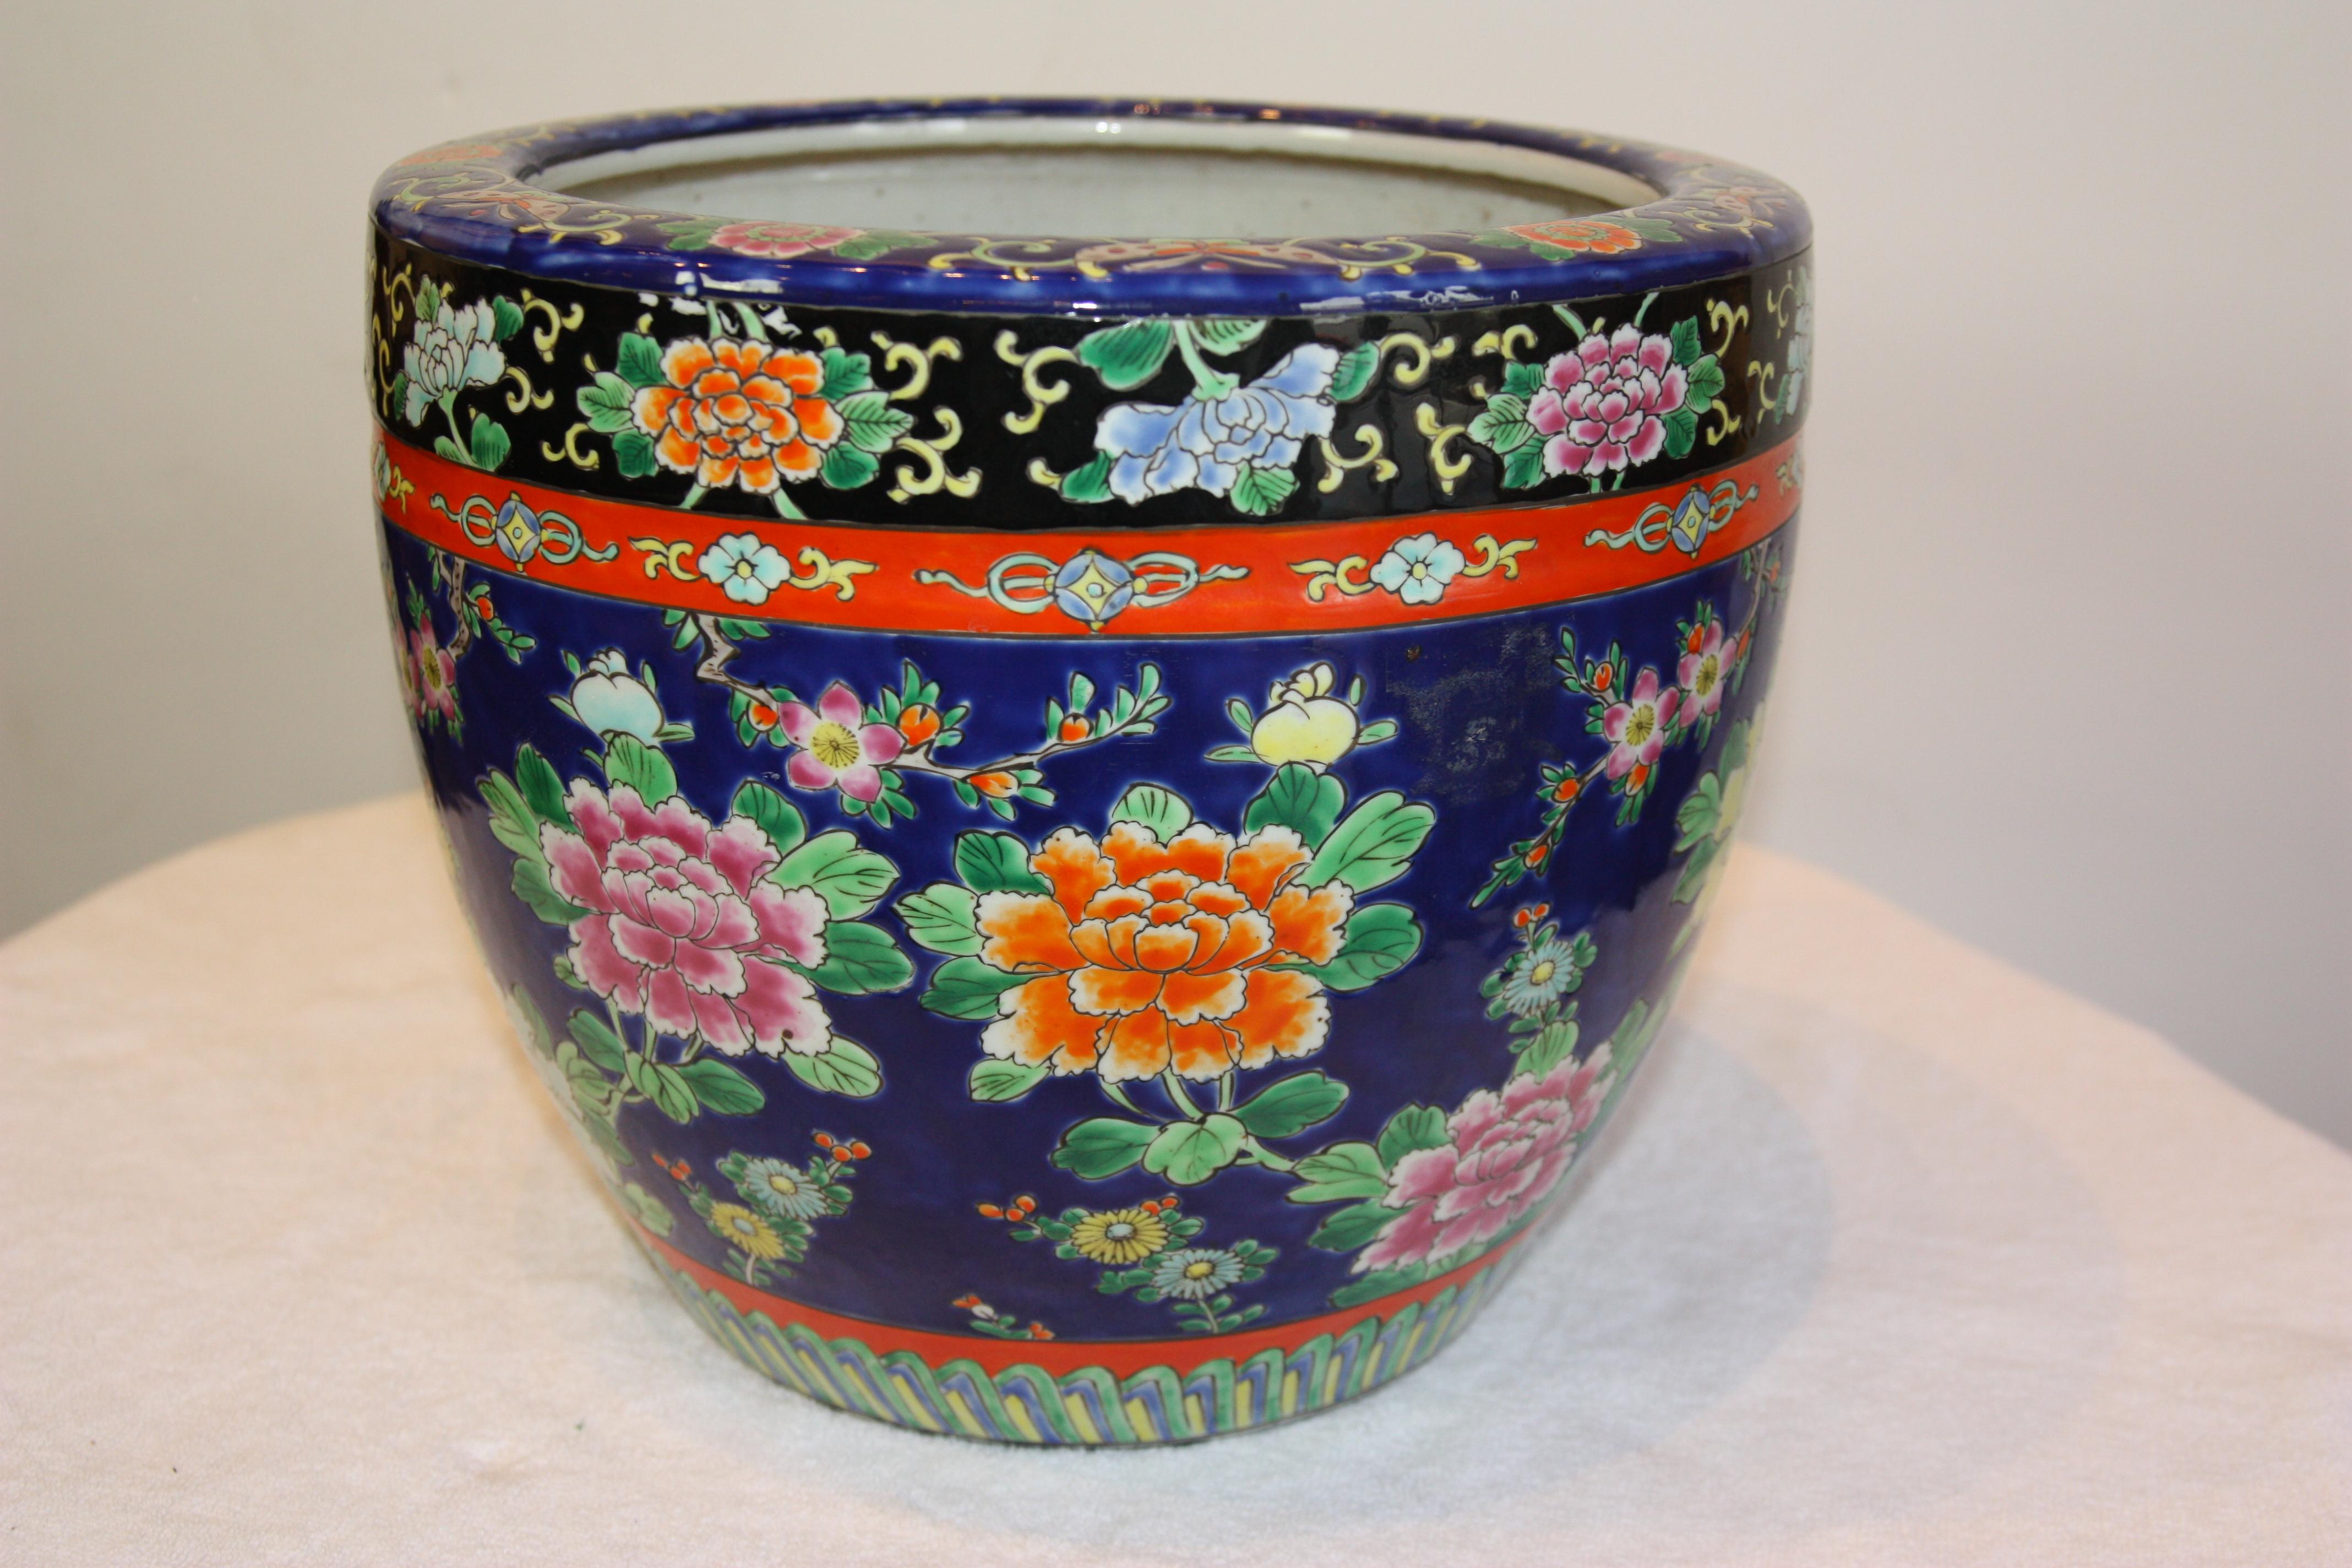 Dark blue, hand-painted, Asian jardinière with flowers and design bands.